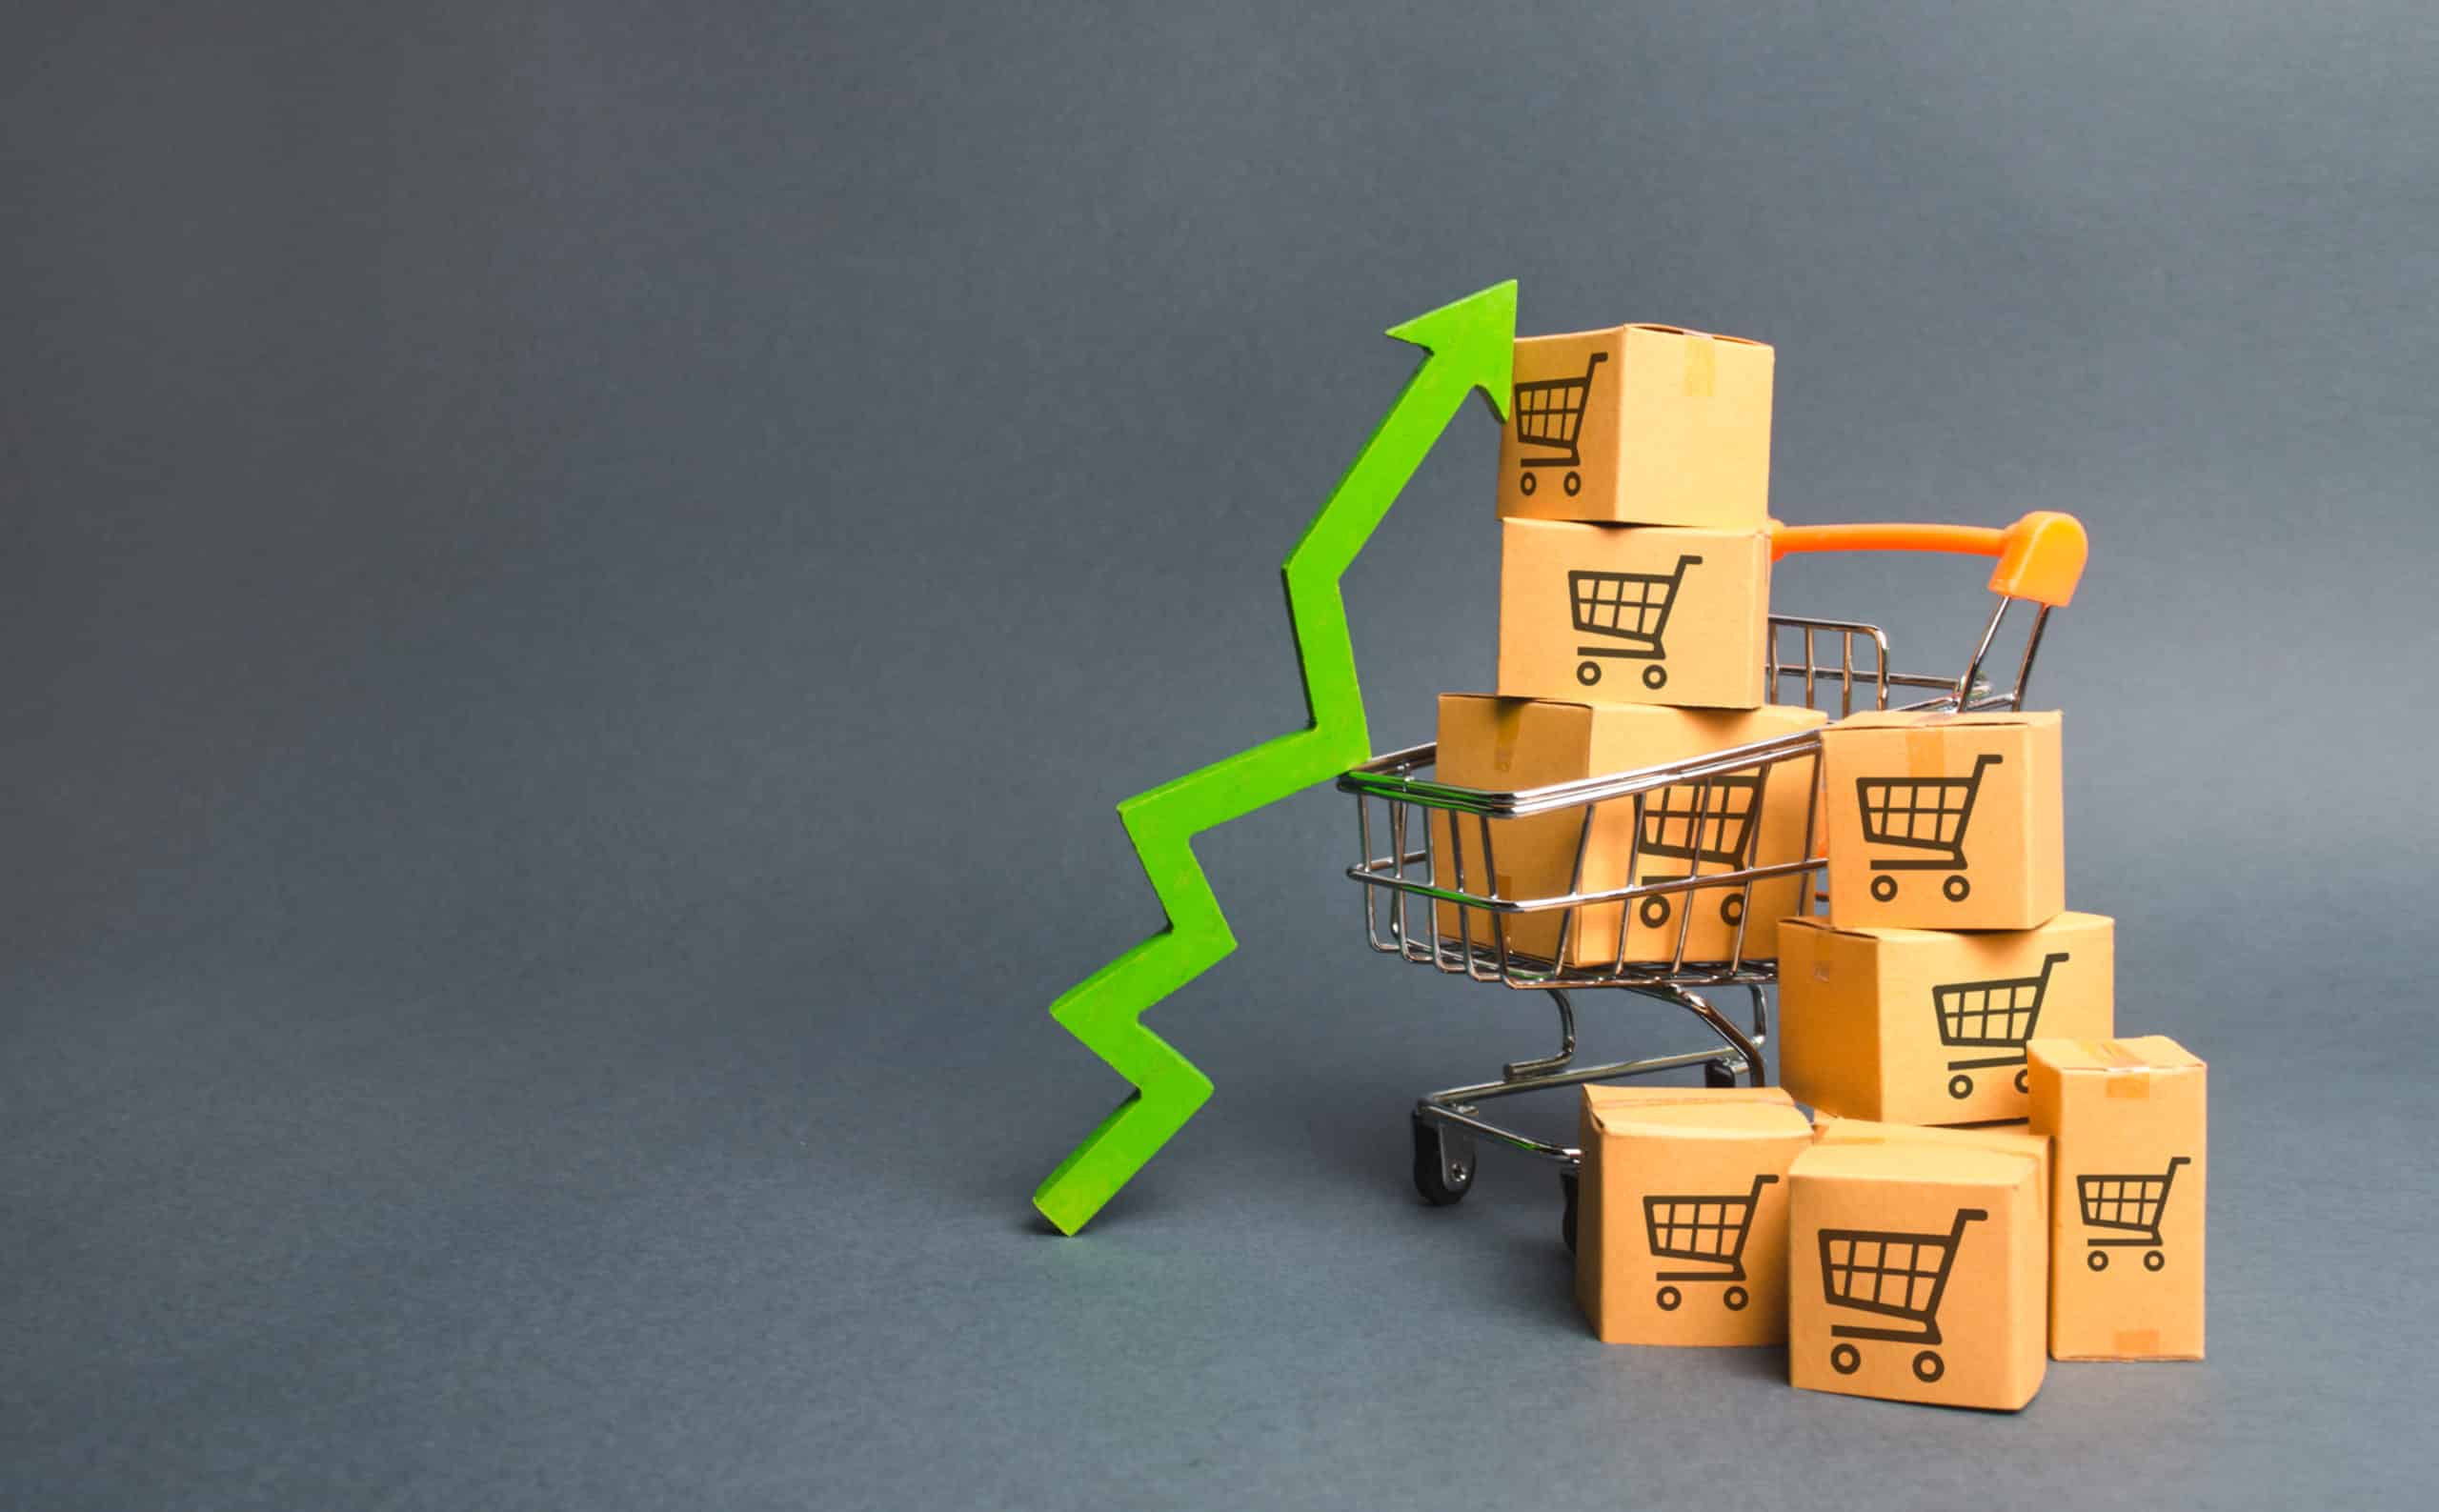 shopping-cart-with-cardboard-boxes-with-pattern-trading-carts-green-up-arrow-scaled